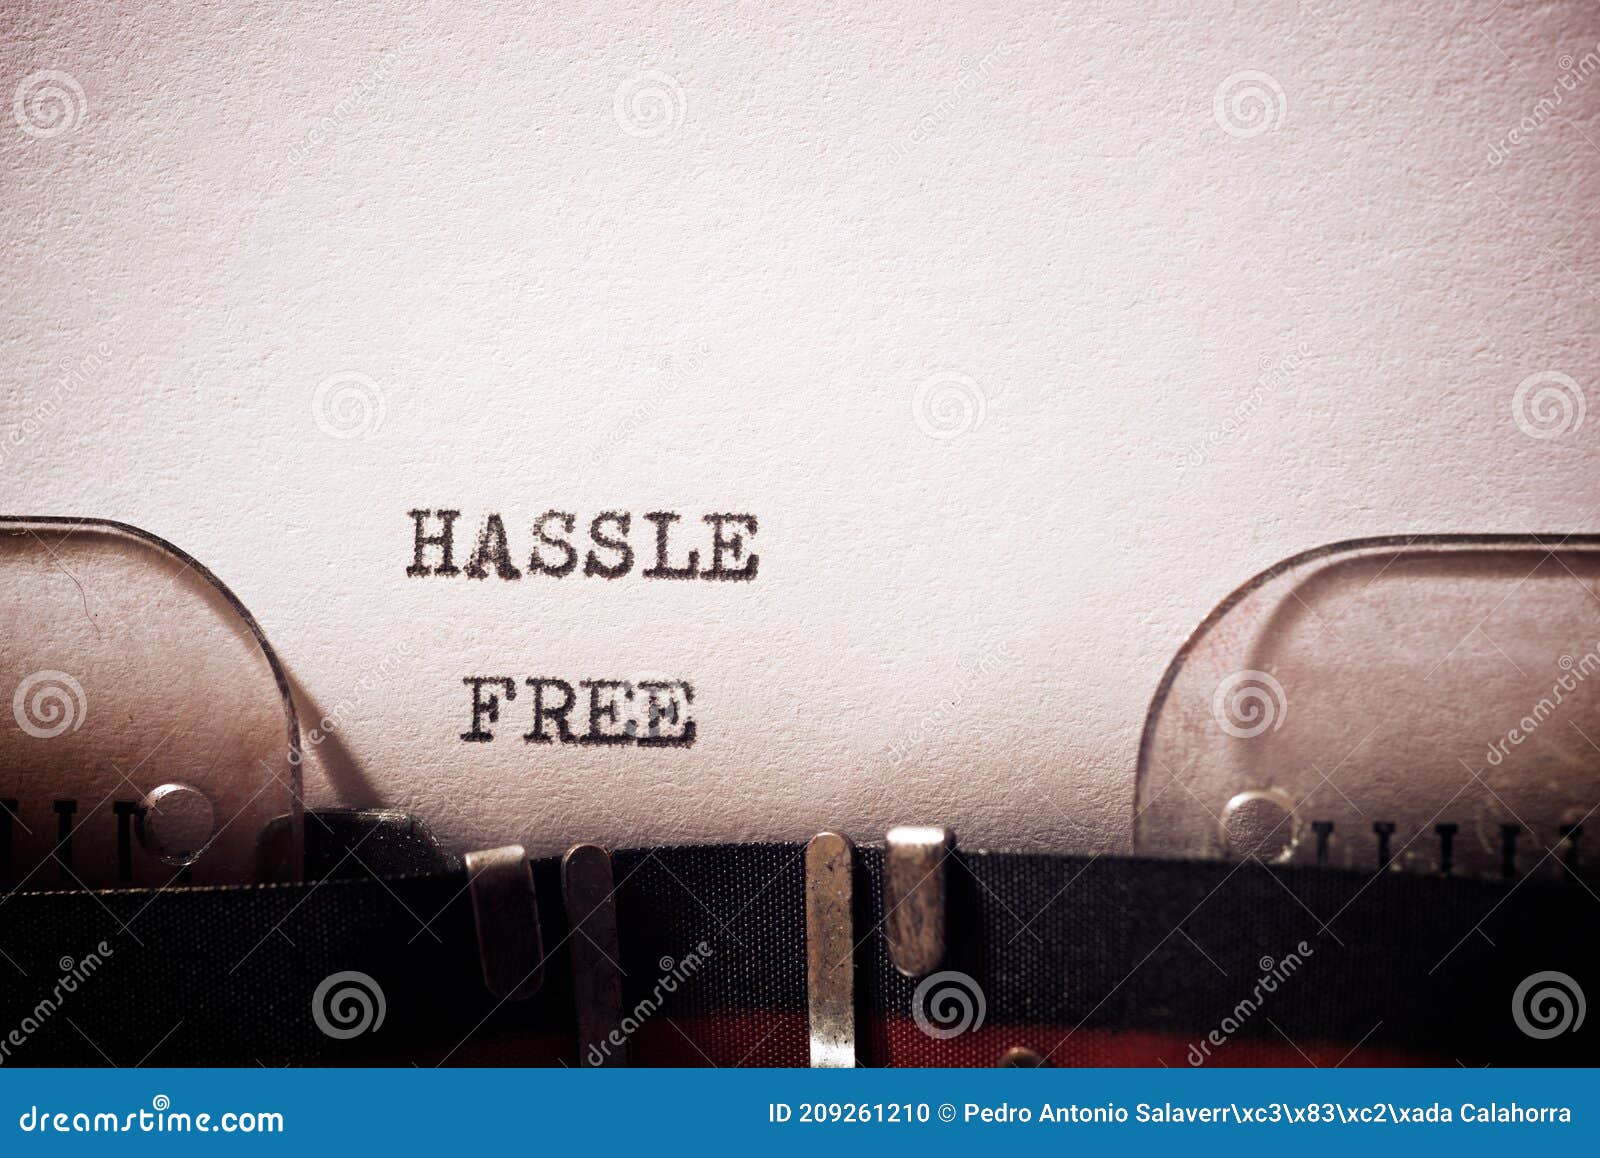 hassle free concept